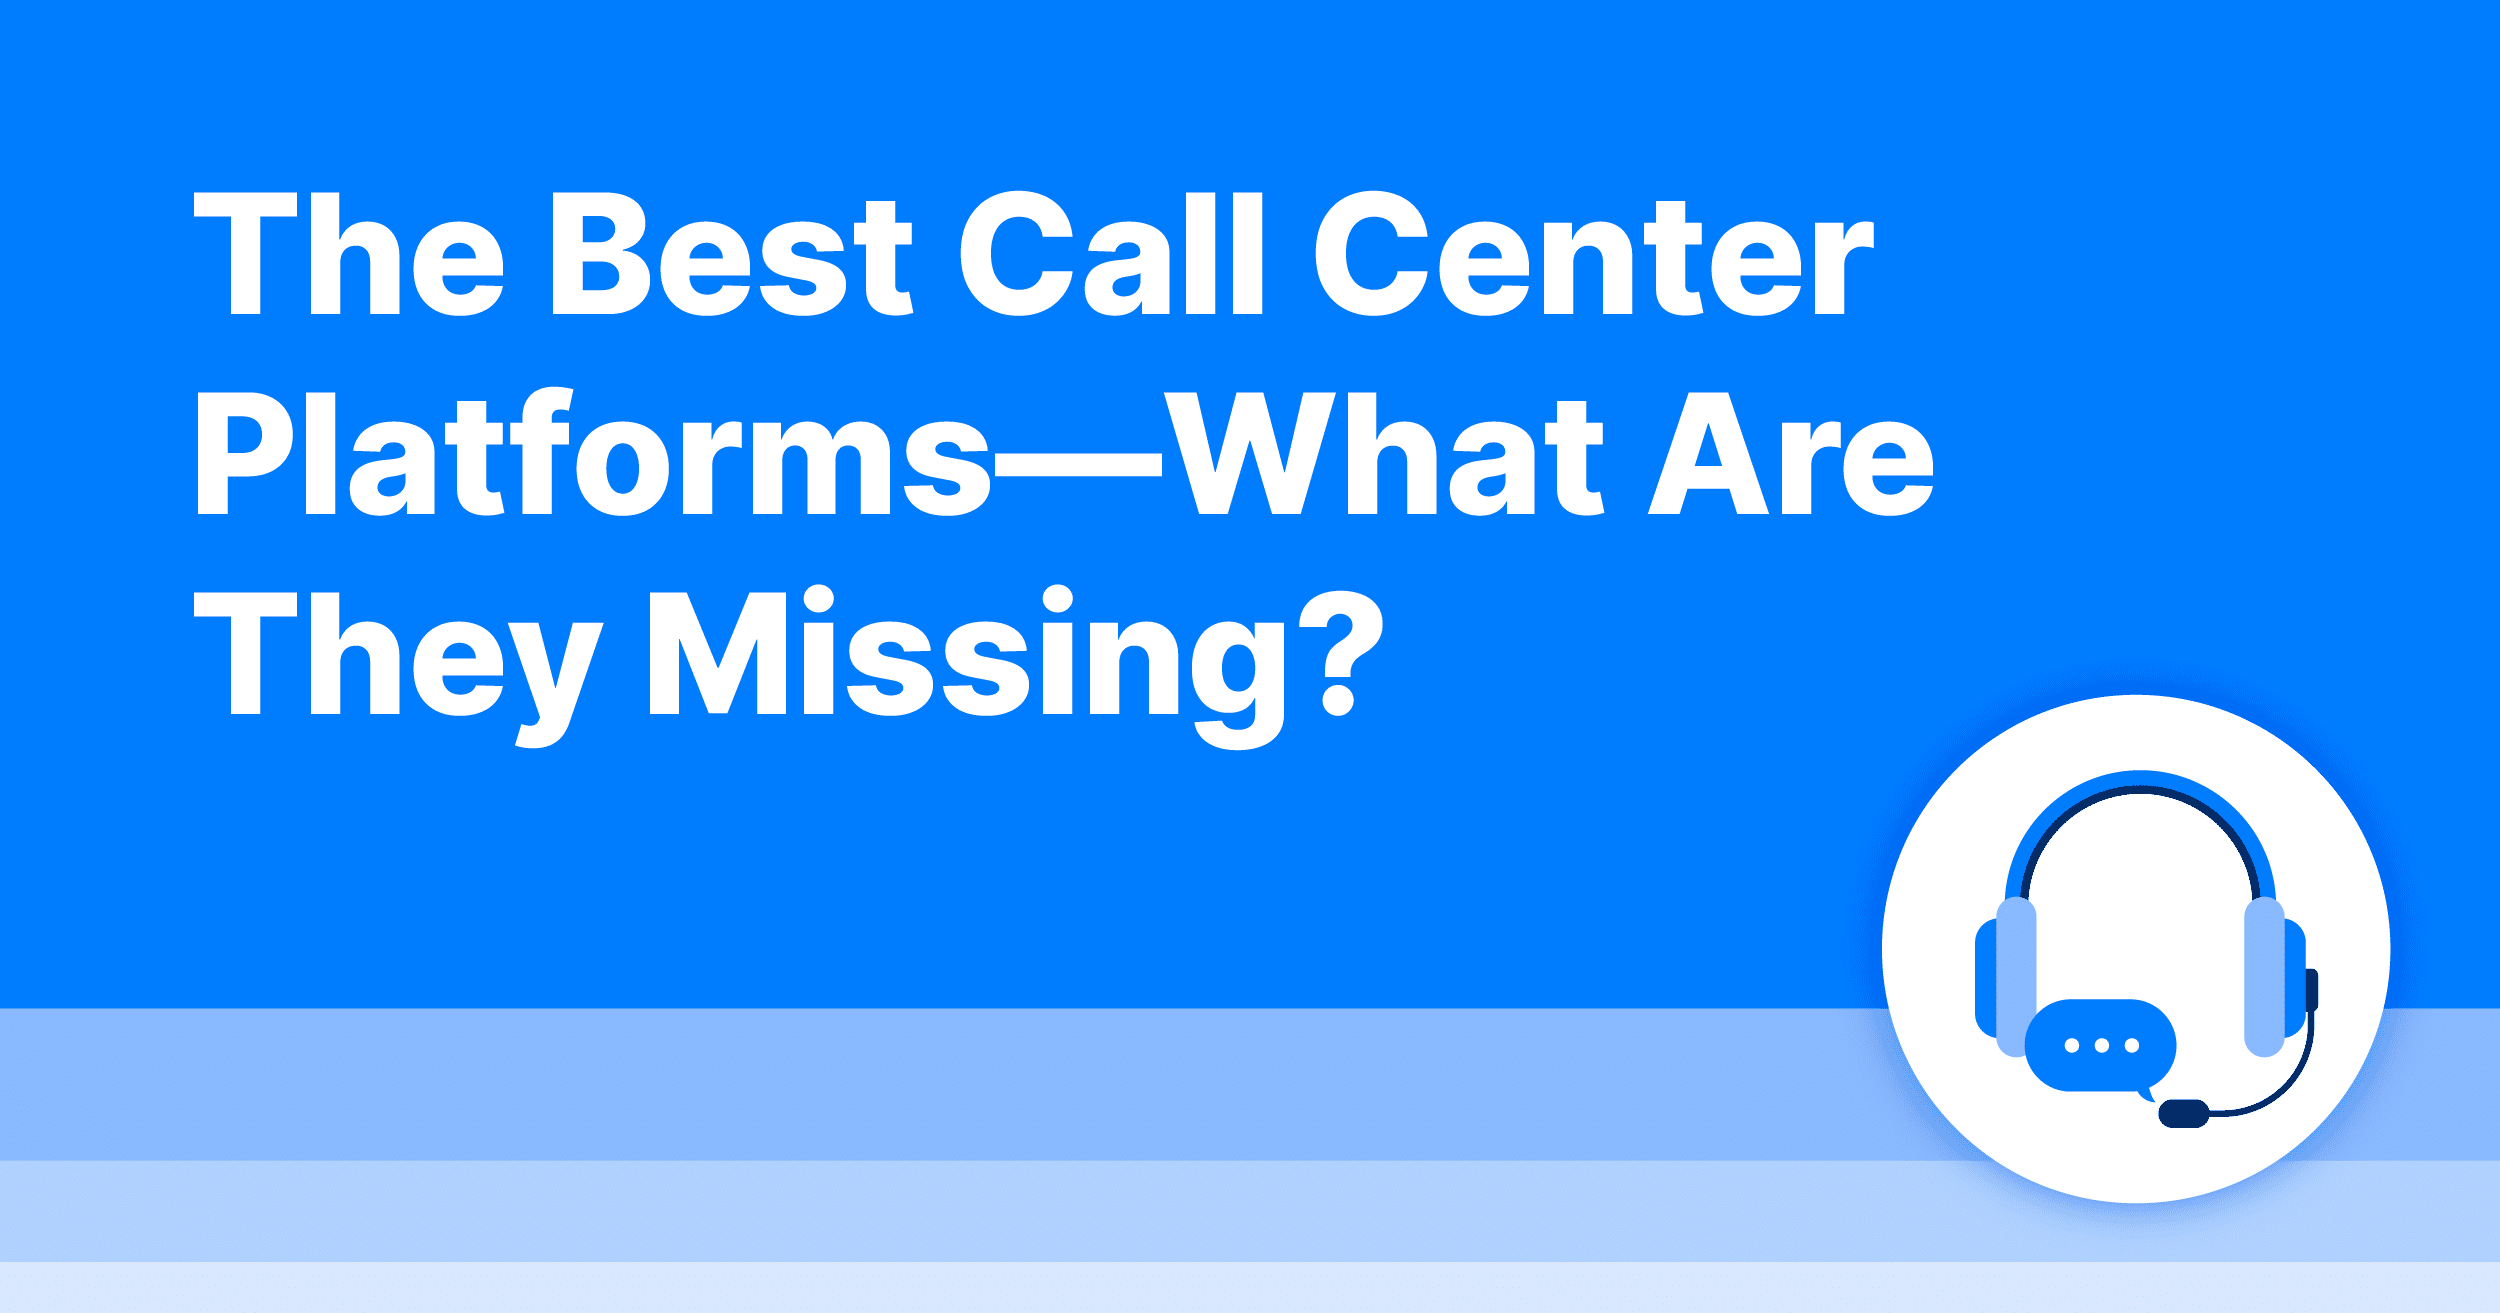 The Best Call Center Platforms: What Are They Missing?